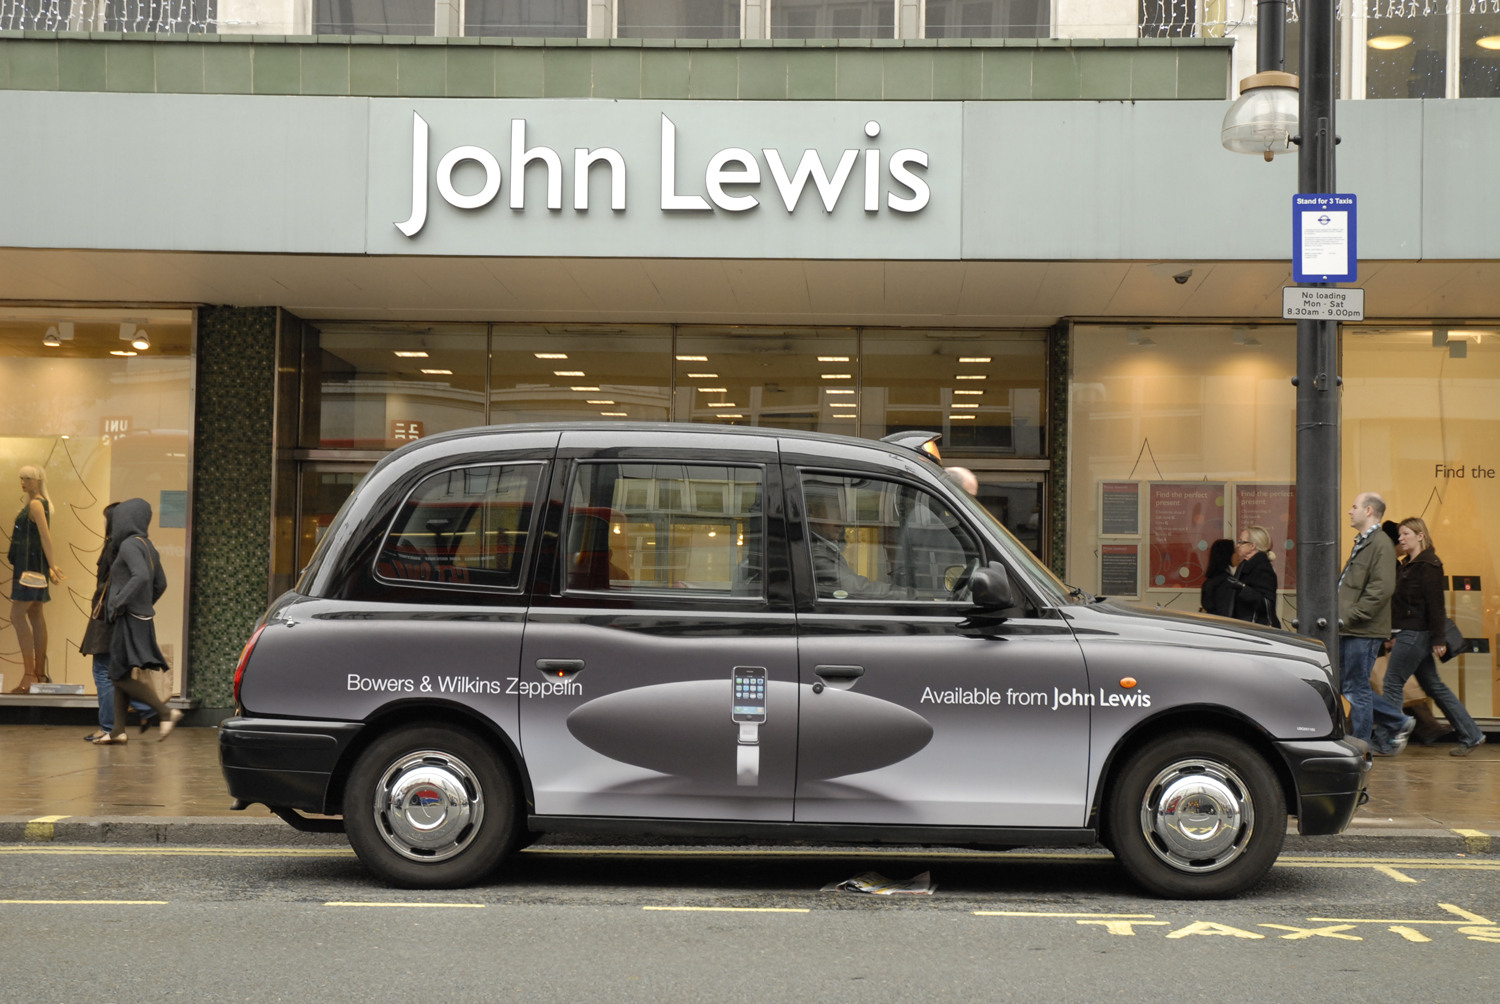 2008 Ubiquitous taxi advertising campaign for Bowers & Wilkins - Available at John Lewis